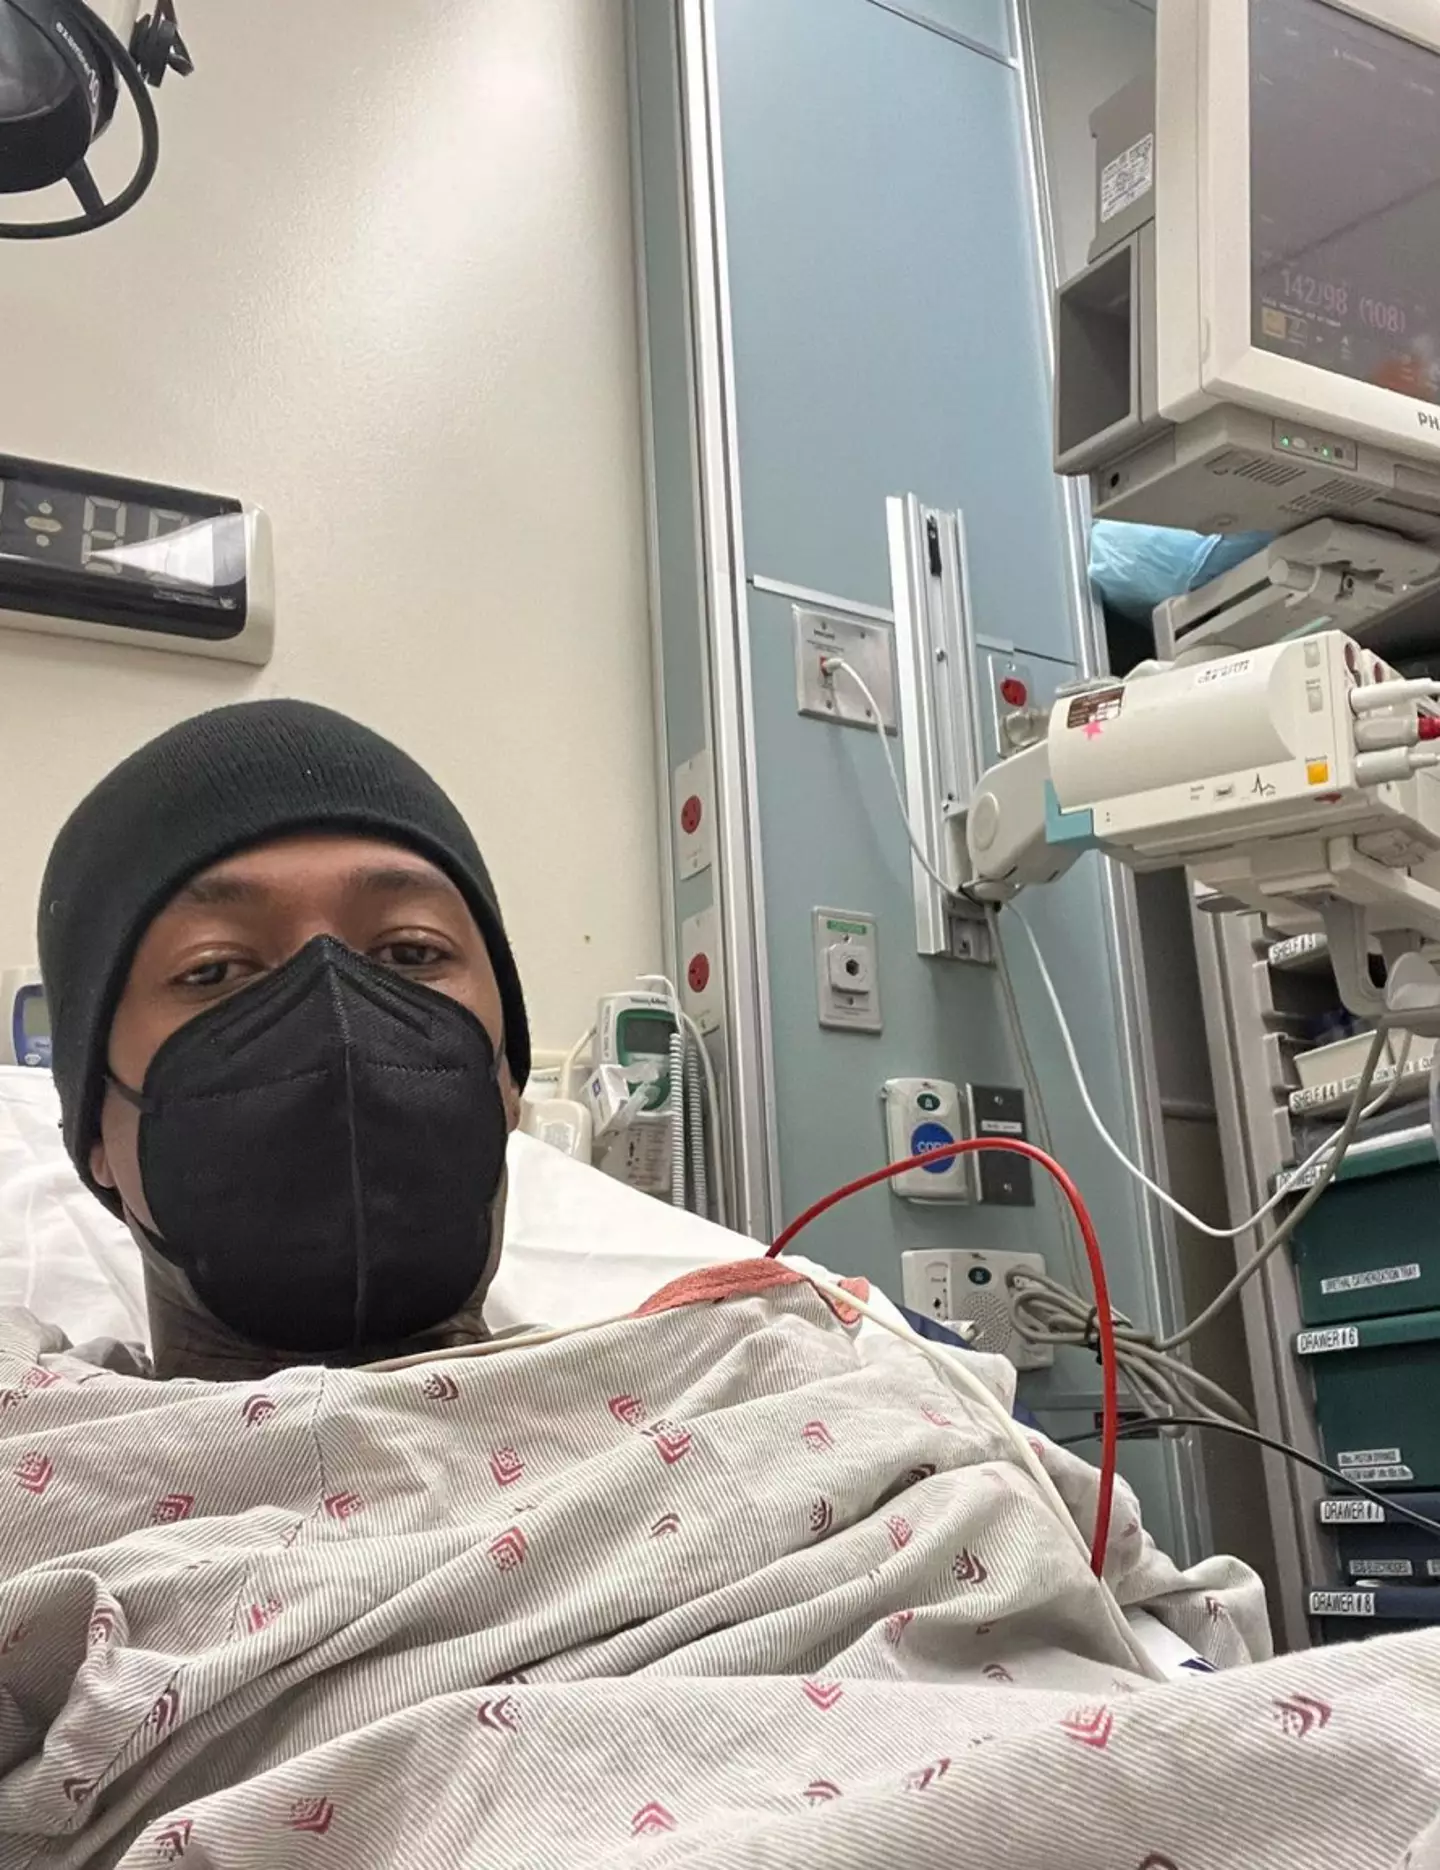 Nick Cannon is hospitalised with Pneumonia just weeks after announcing his 12th child.